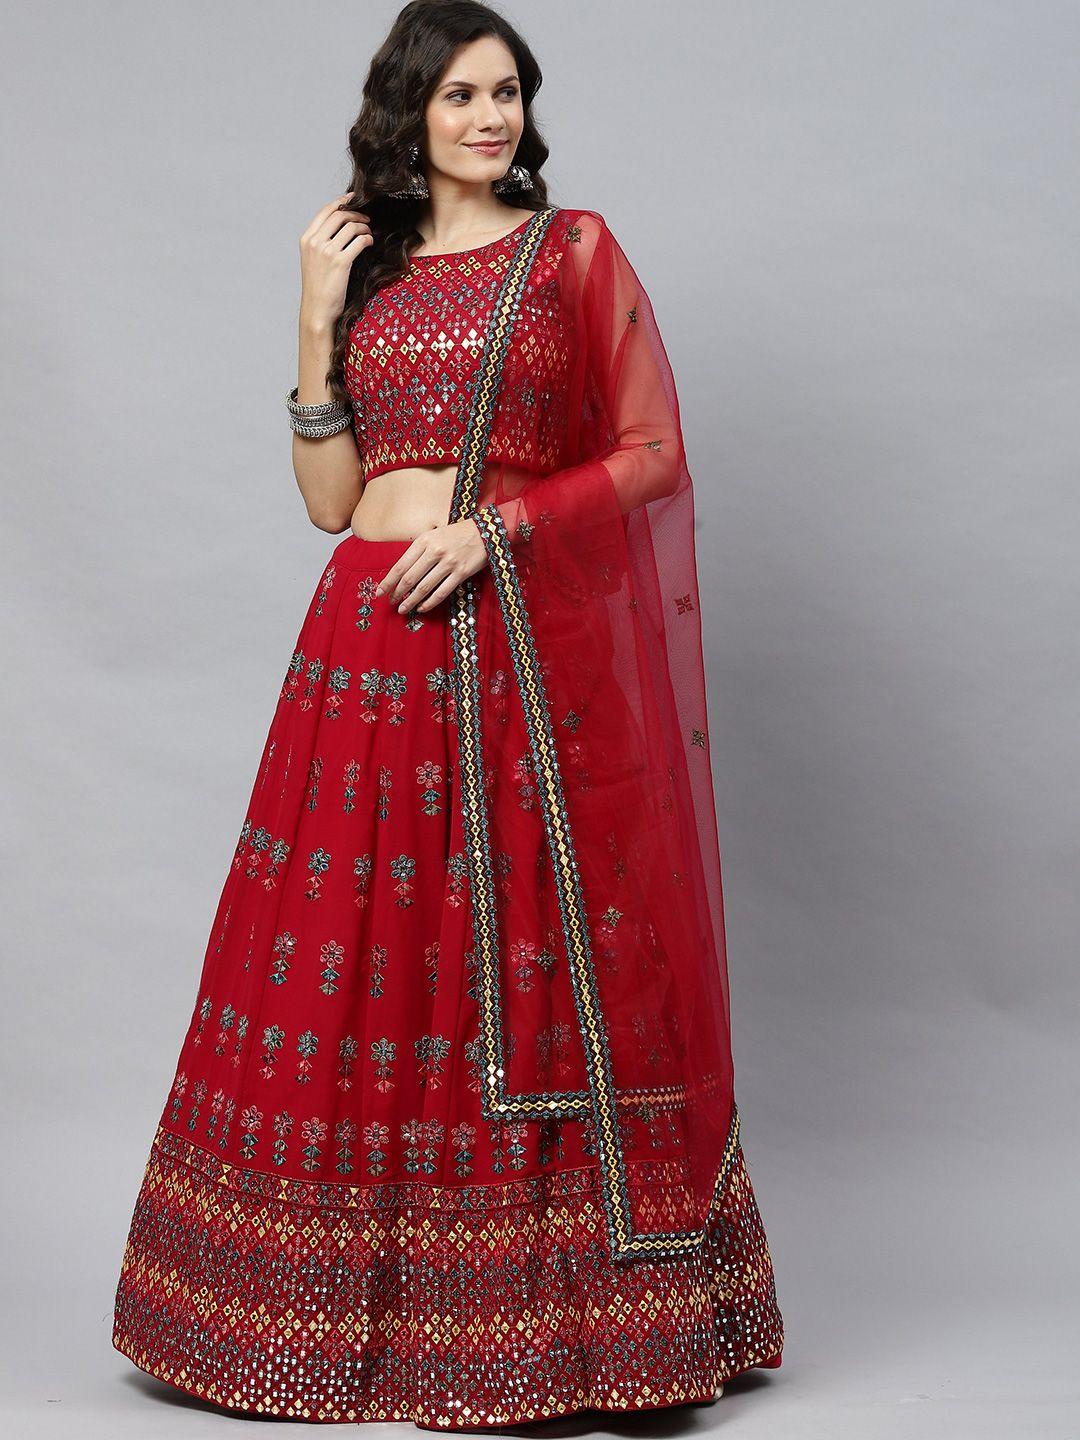 here&now embellished mirror work semi-stitched lehenga & unstitched blouse with dupatta